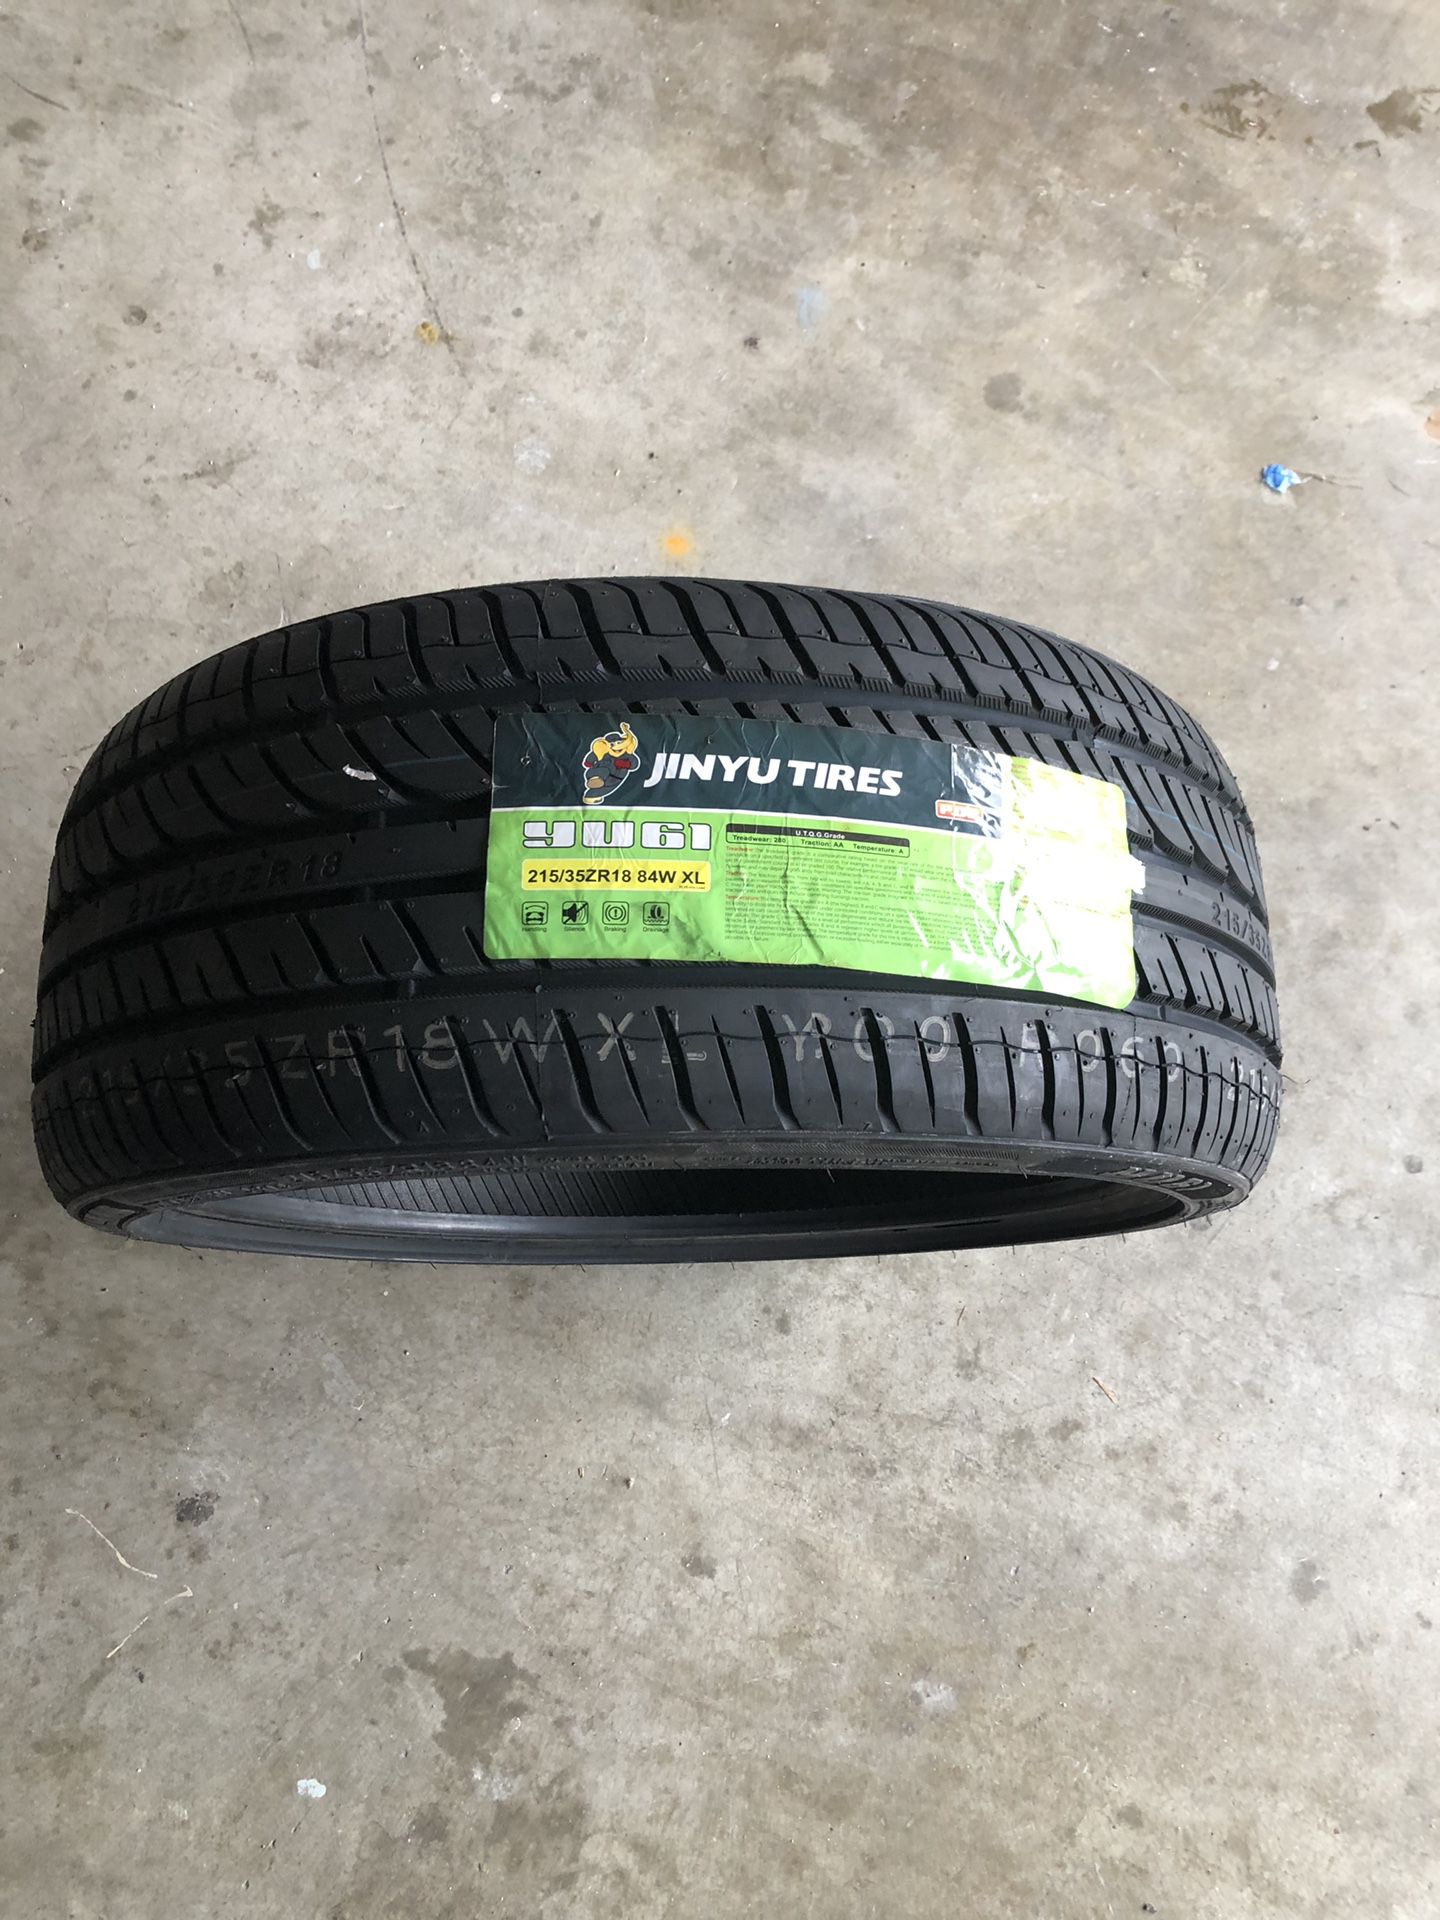 Brand new jinyu 215/35/R18 for Sale in Moreno Valley, CA - OfferUp